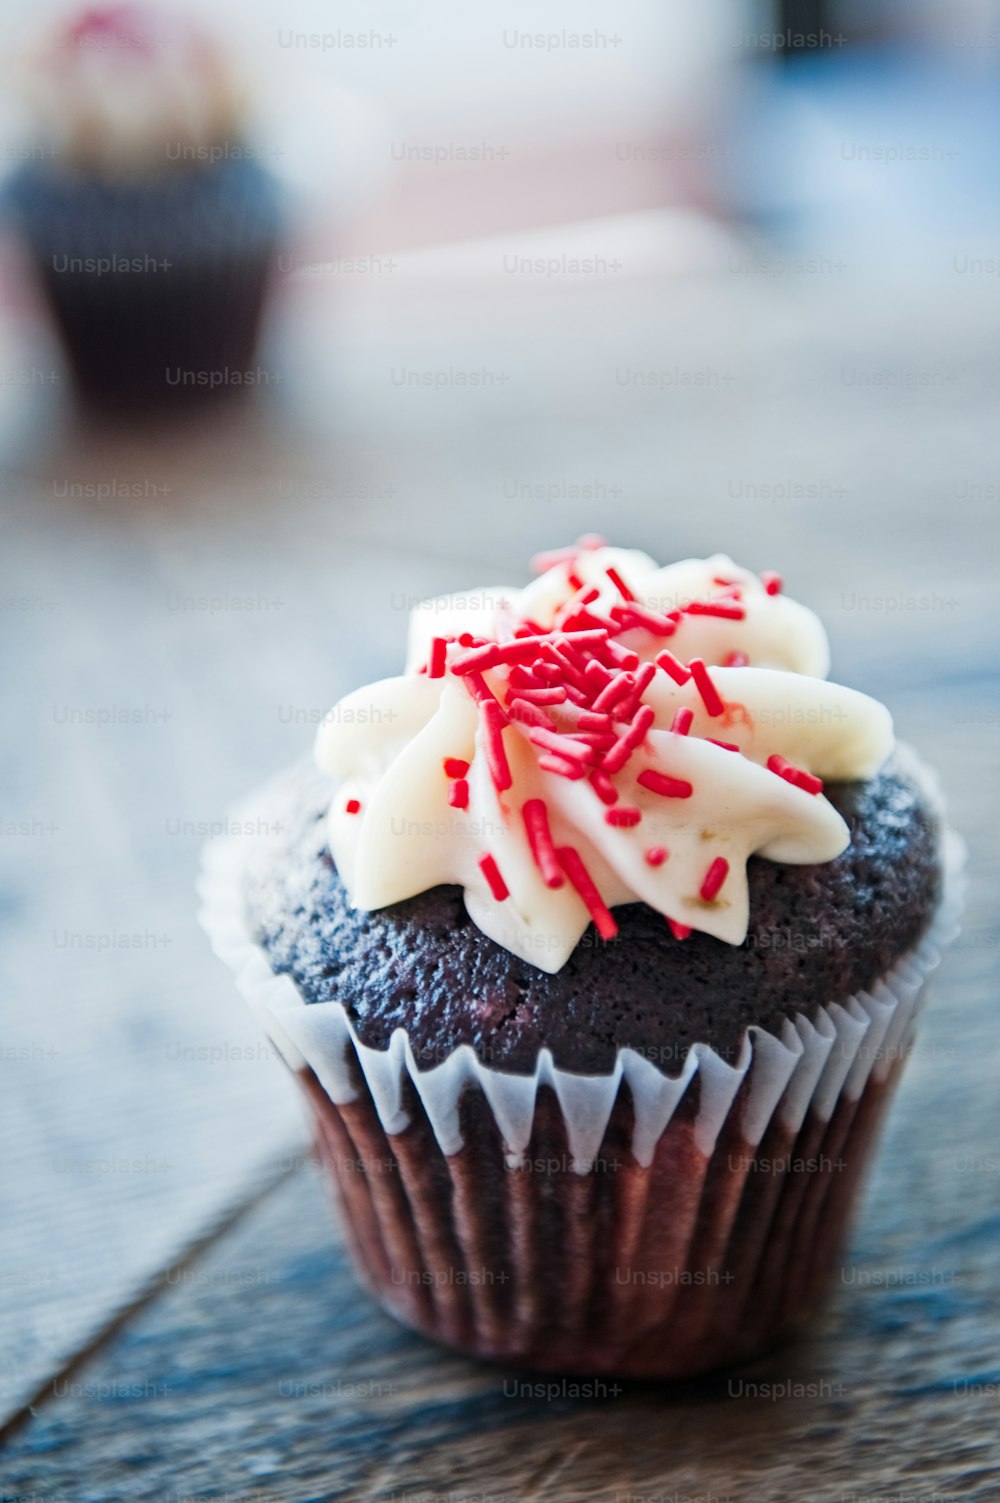 A cupcake with icing is seen